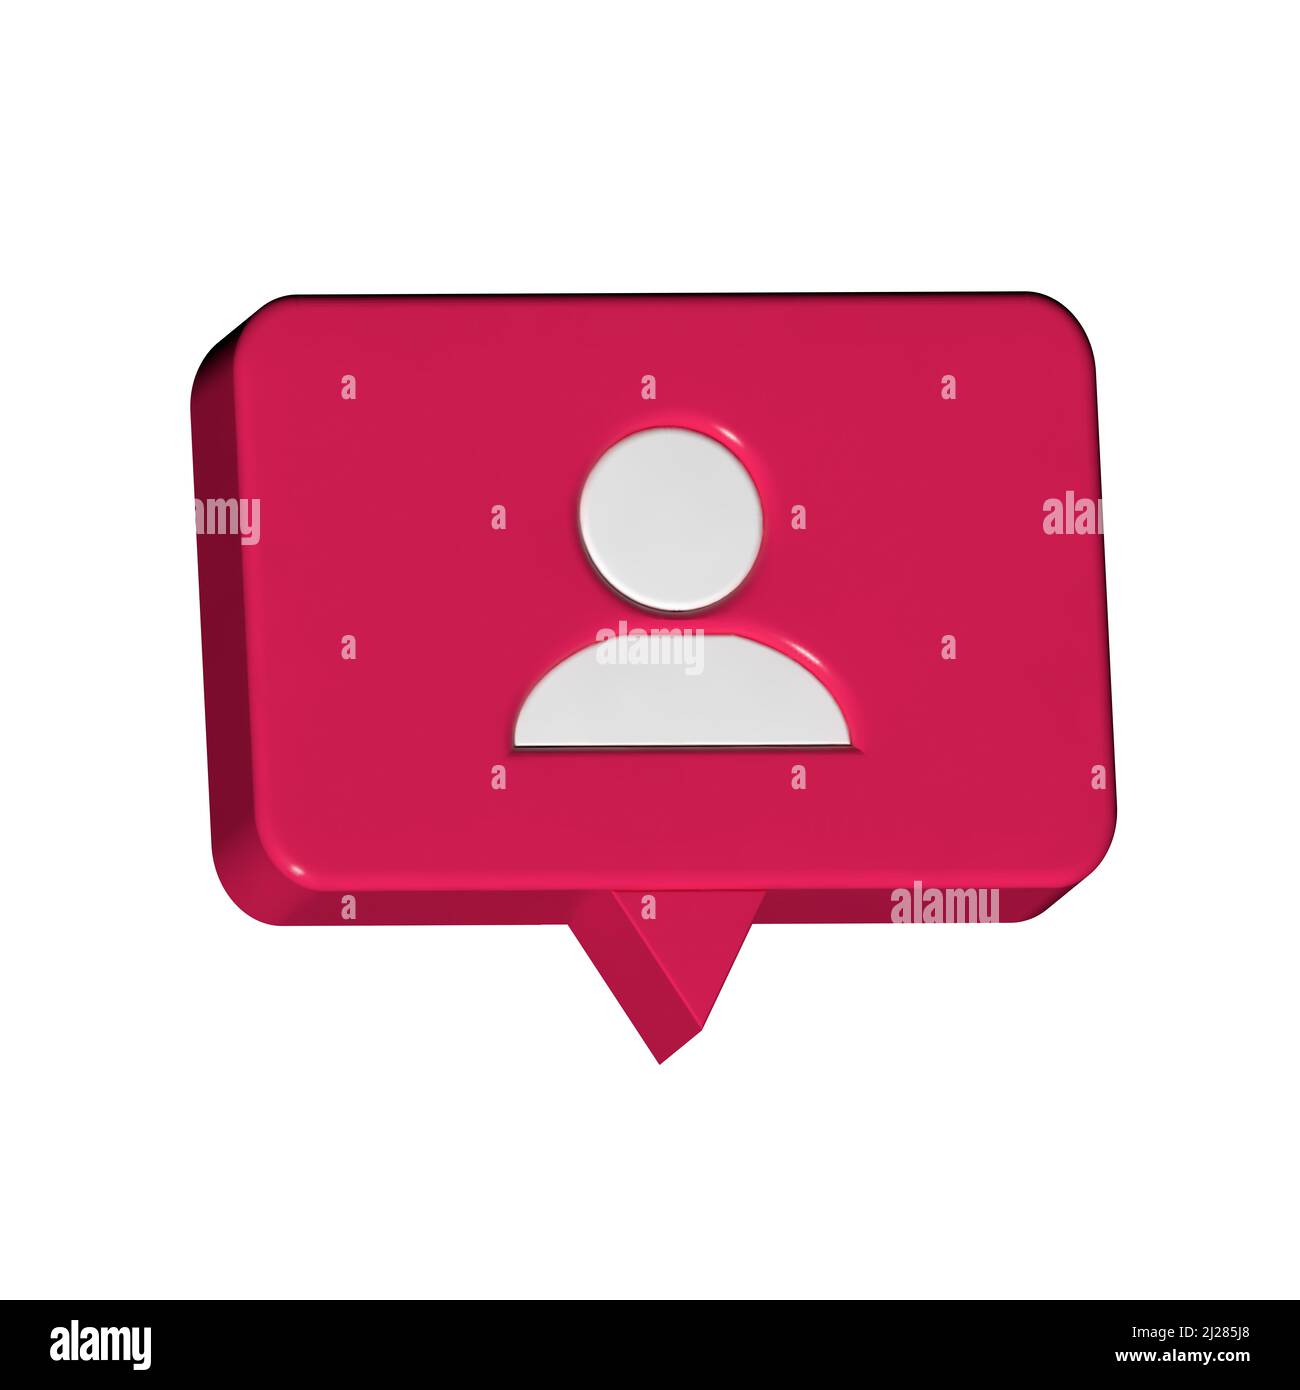 Social media notification icon. Follow icon on a red background. 3d design. Stock Photo